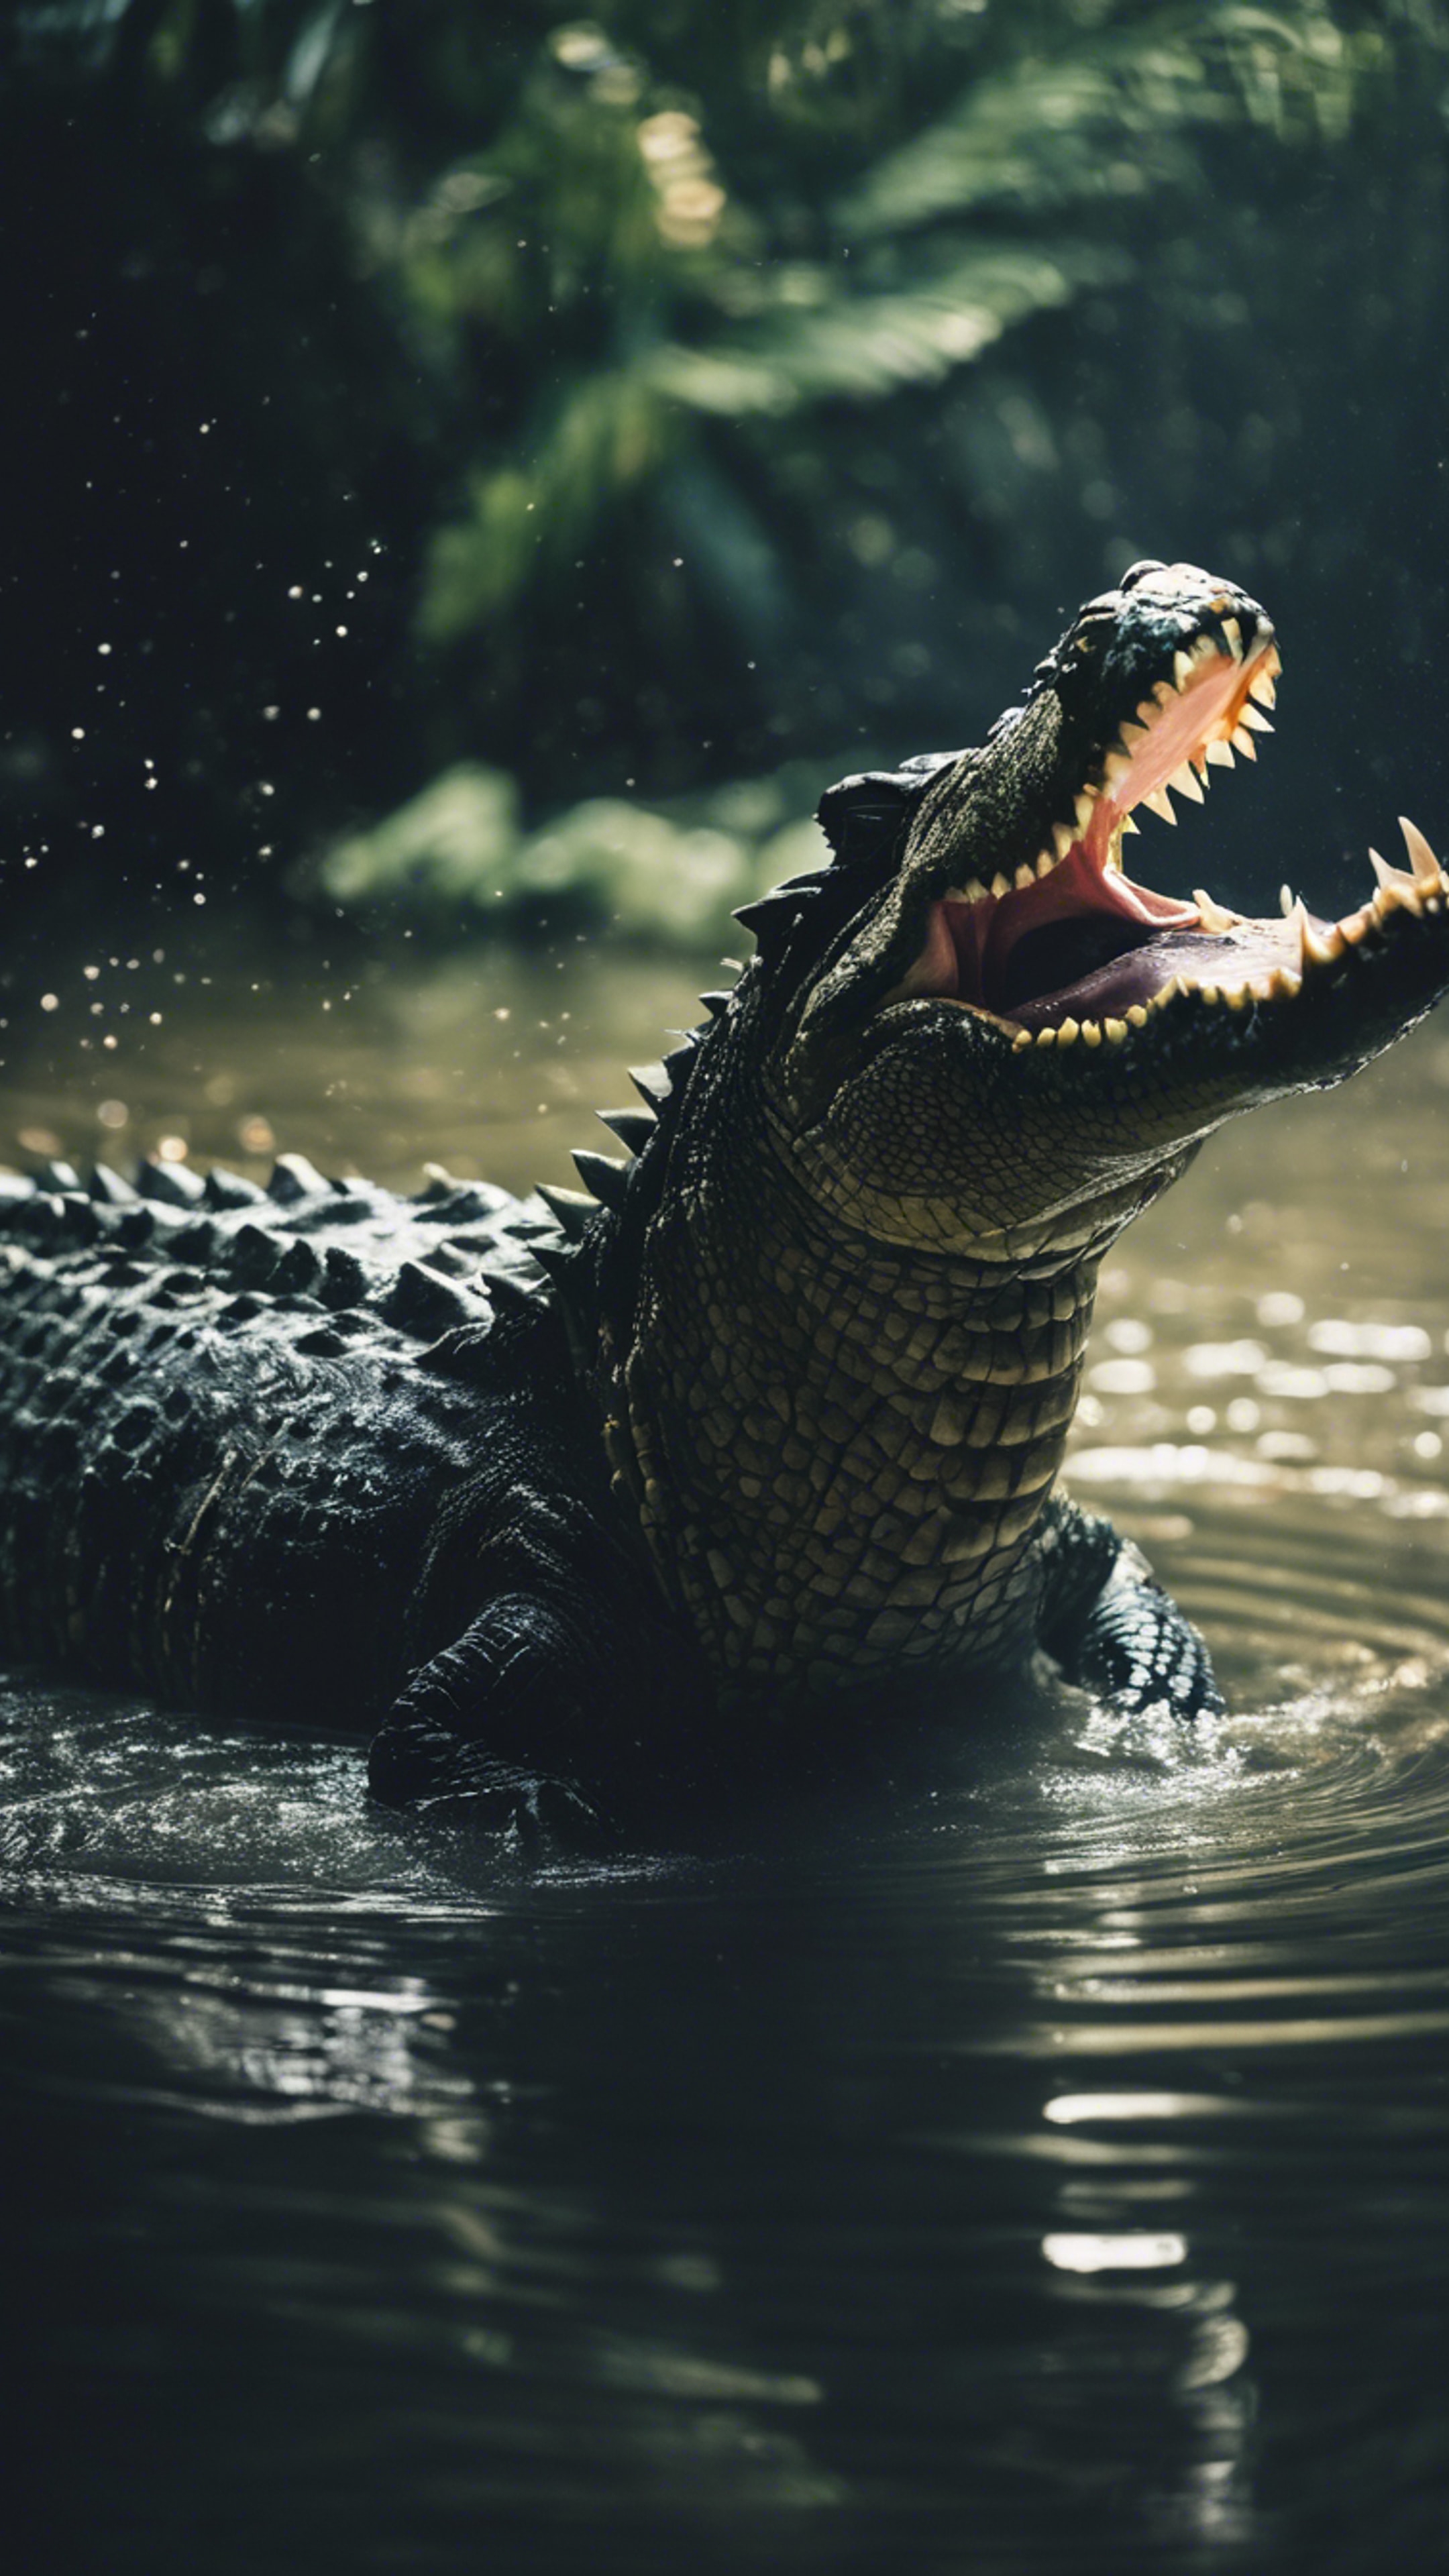 Two crocodiles engaging in a territorial battle in the middle of a dark lagoon. Tapeta na zeď[ccc66b55c2b3408d8928]